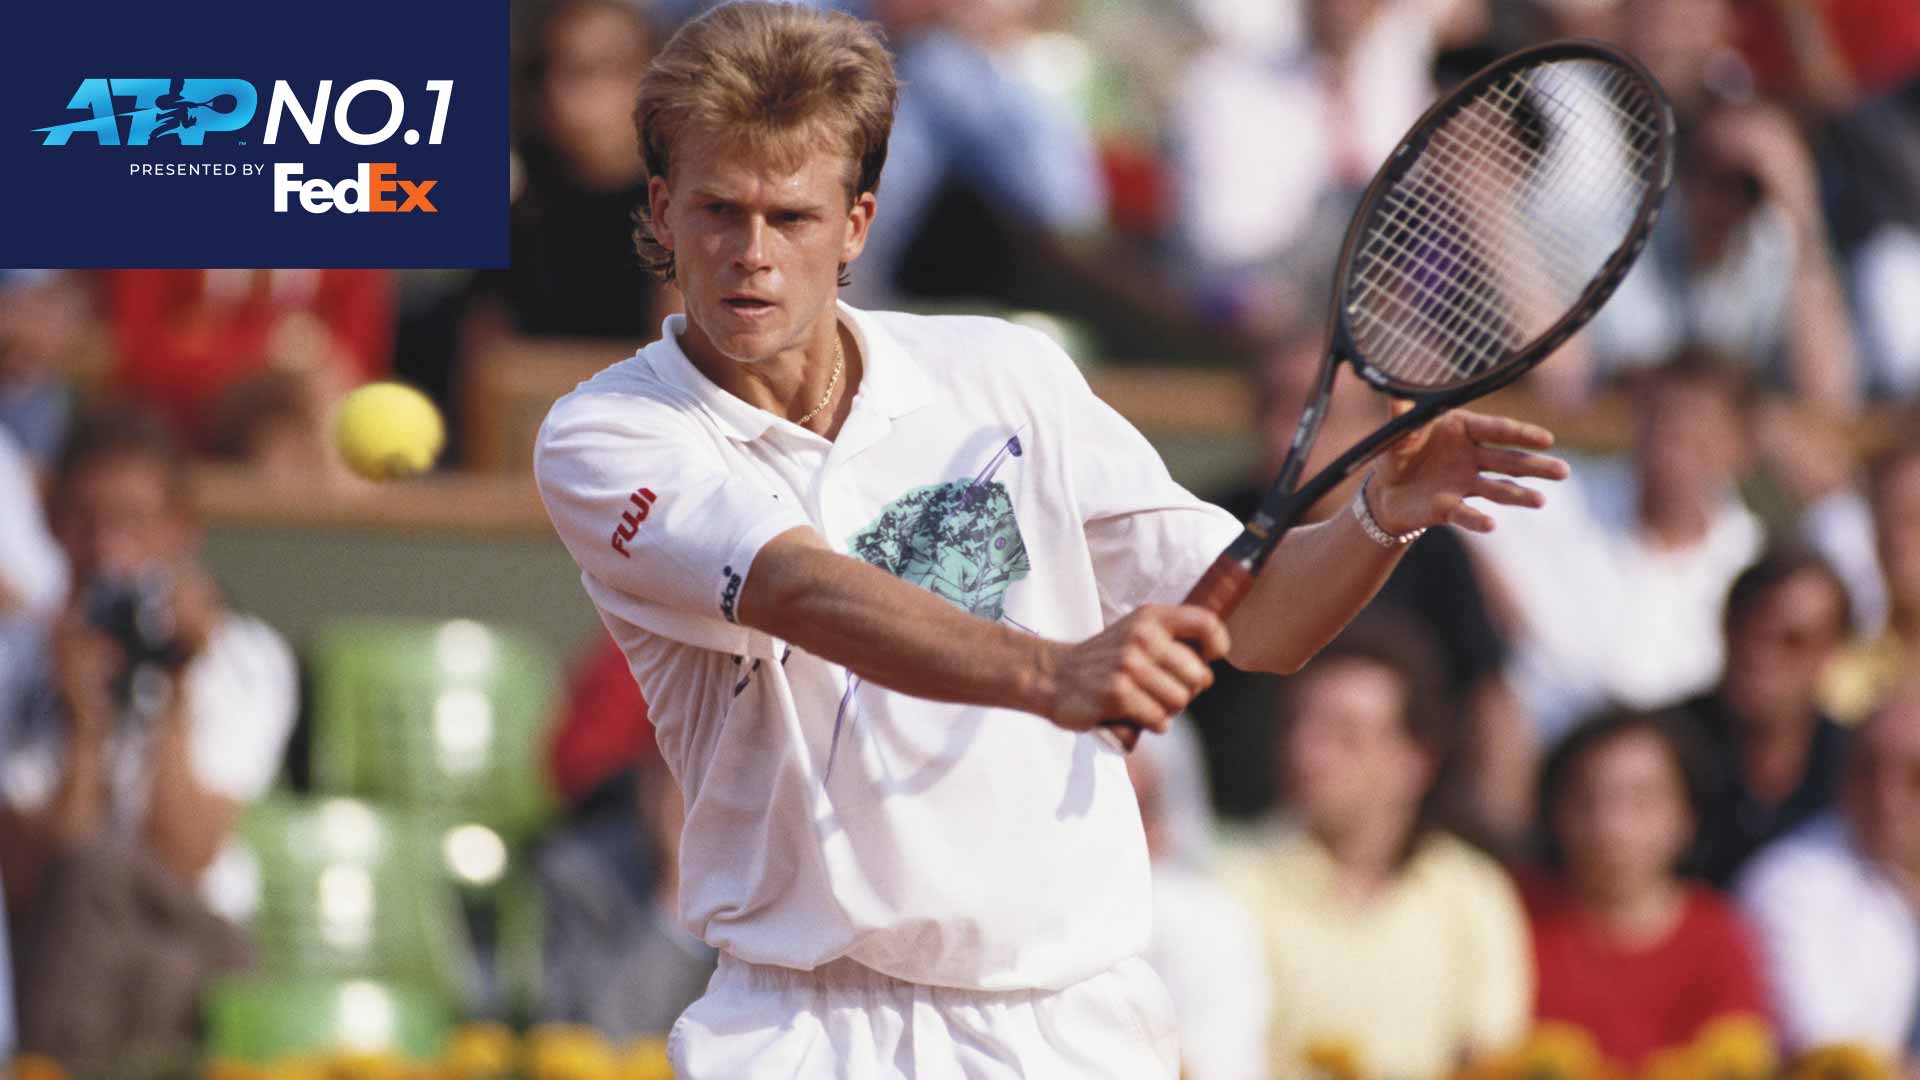 Stefan Edberg first reached No. 1 in the FedEx ATP Rankings in 1990.